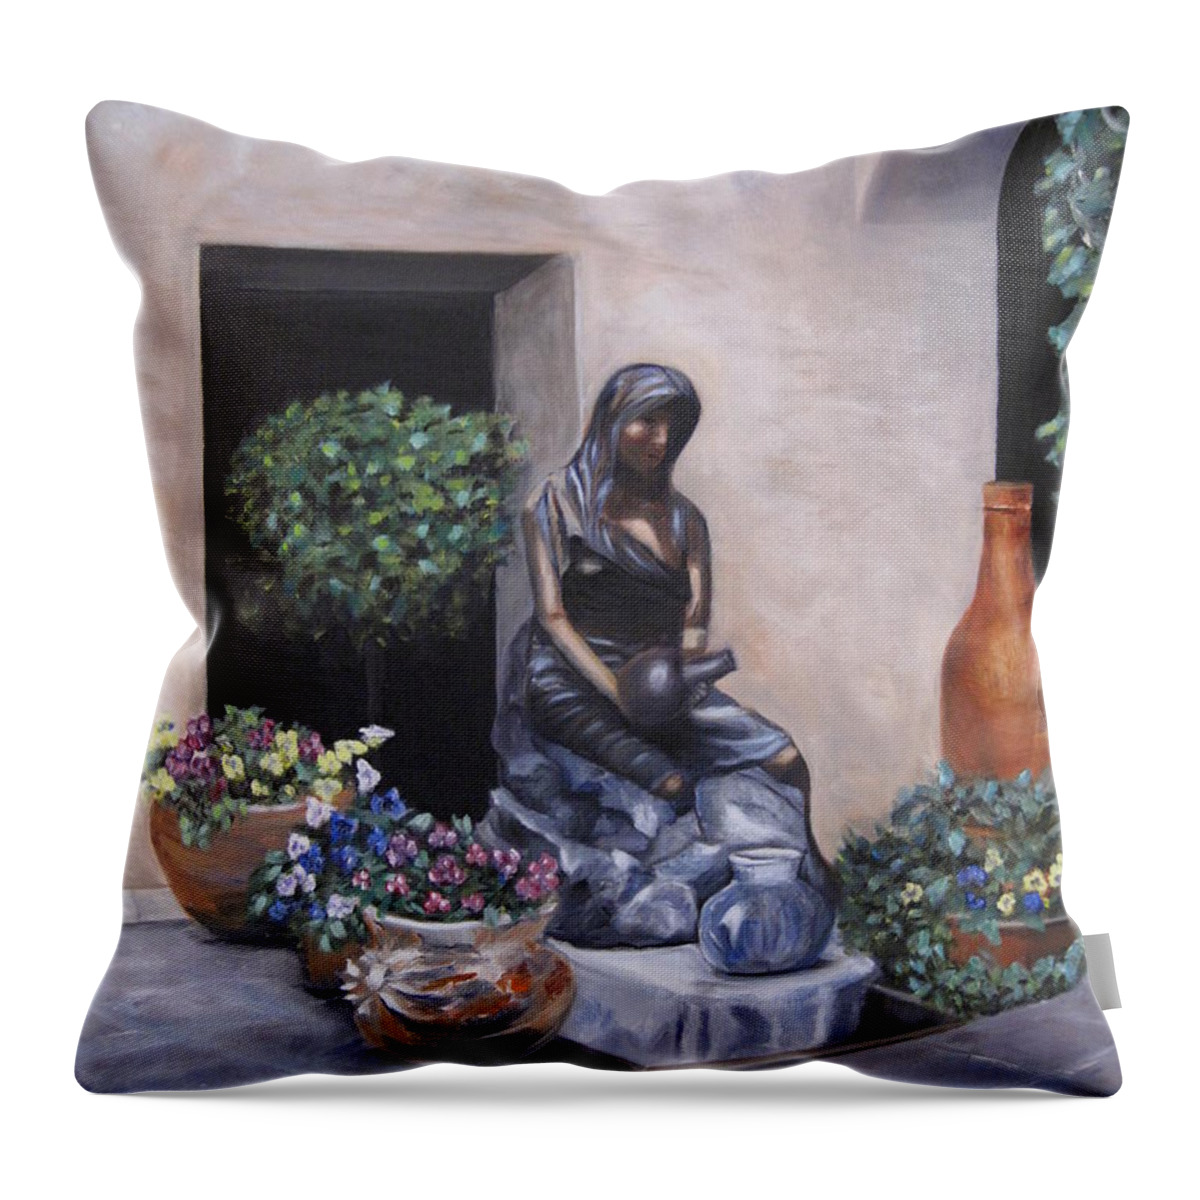 Statue Throw Pillow featuring the painting The Courtyard by Roberta Rotunda